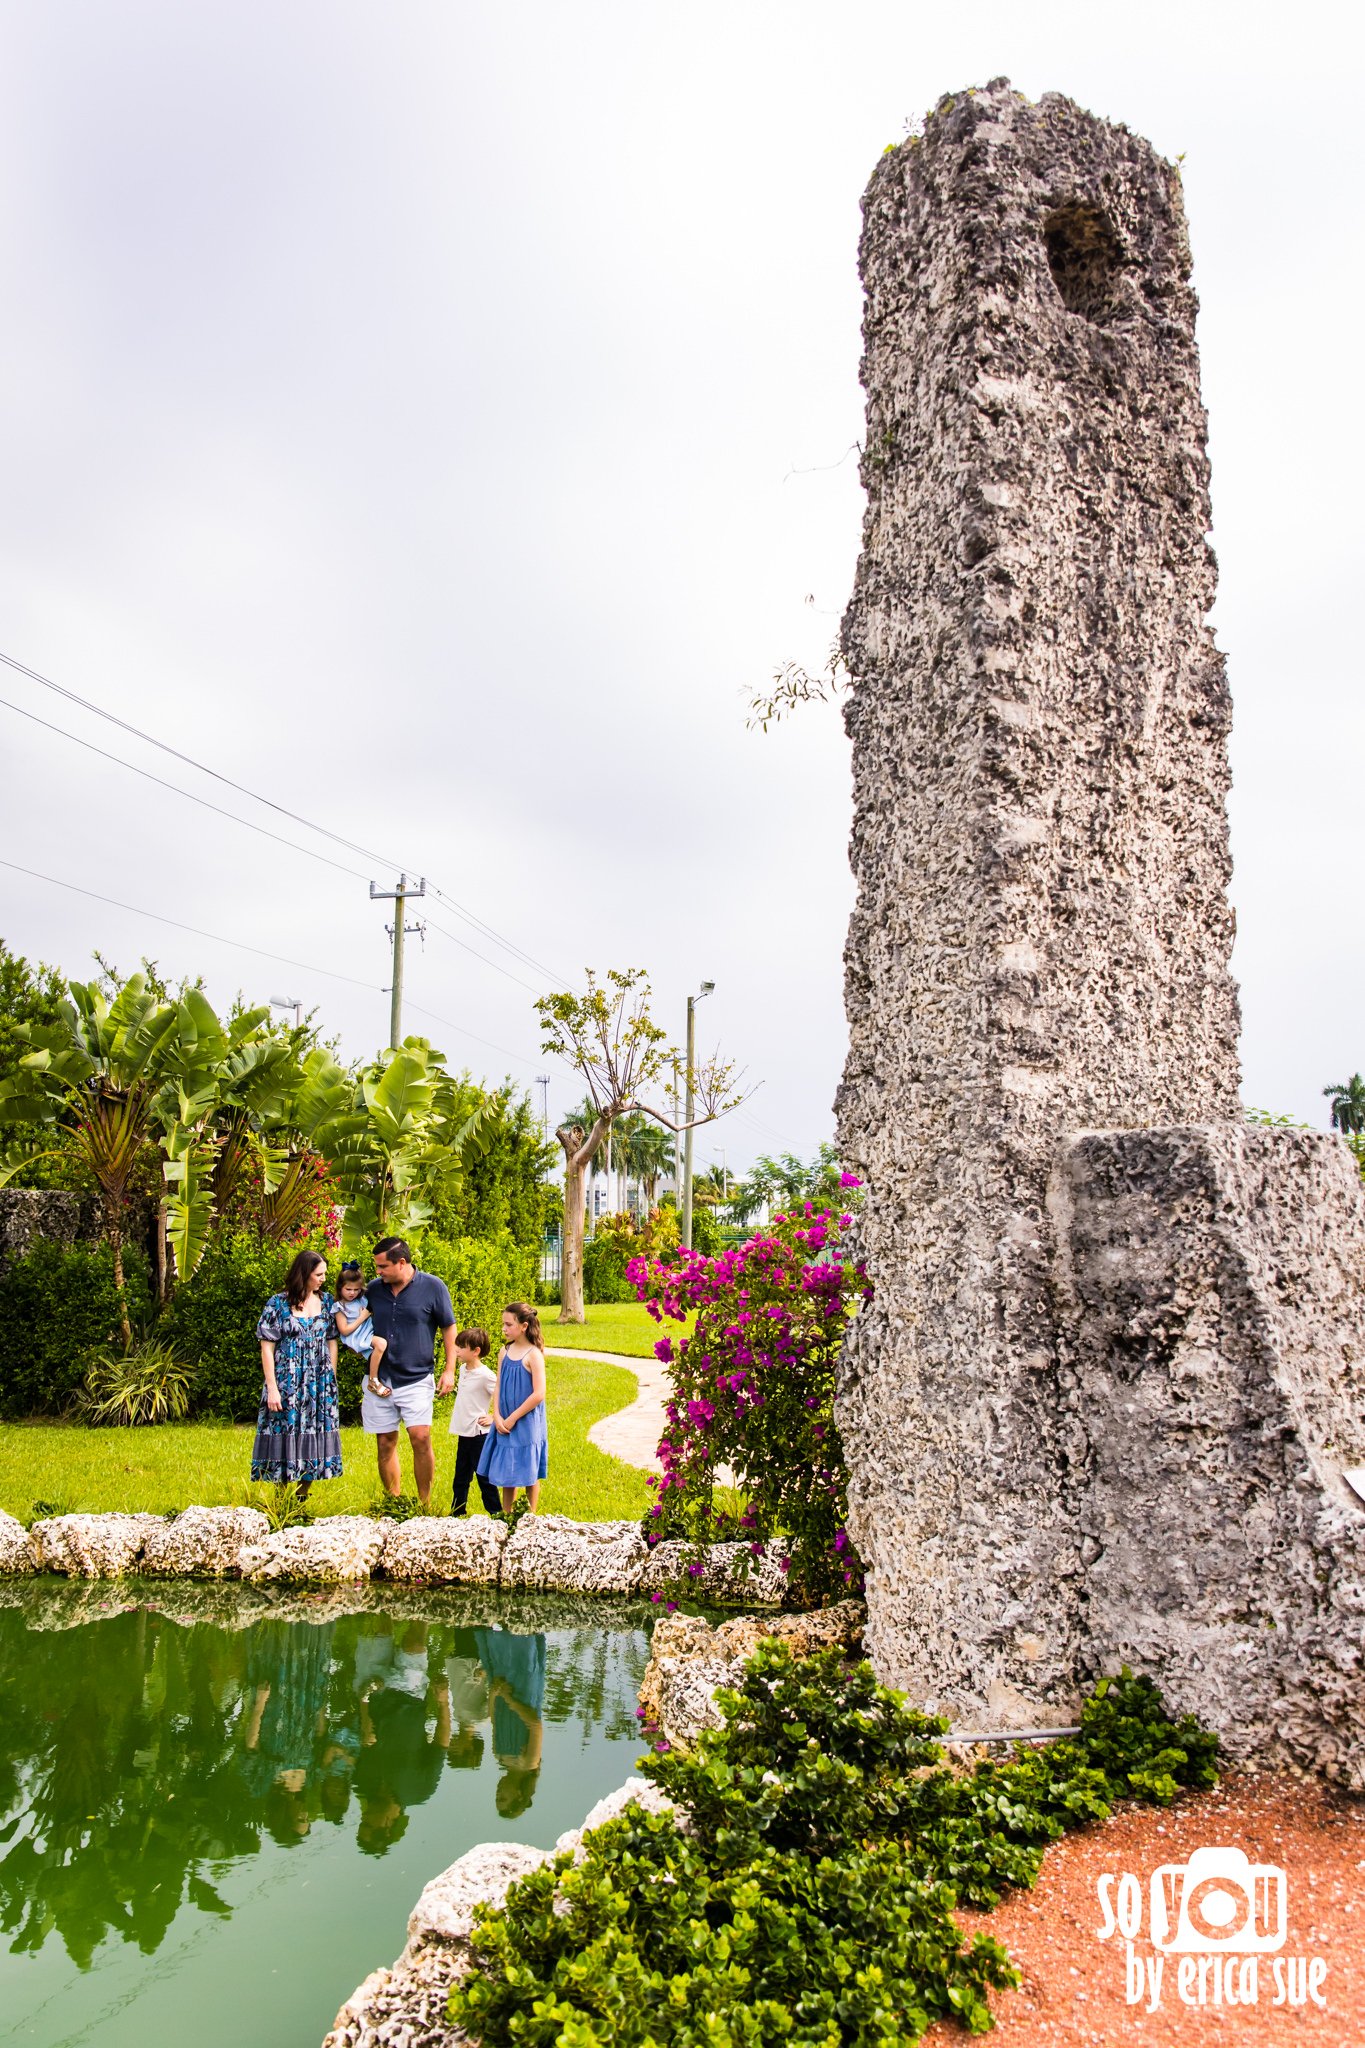 13-lifestyle-family-photographer-coral-castle-miami-fl-so-you-by-erica-sue-ES2_9170.jpg